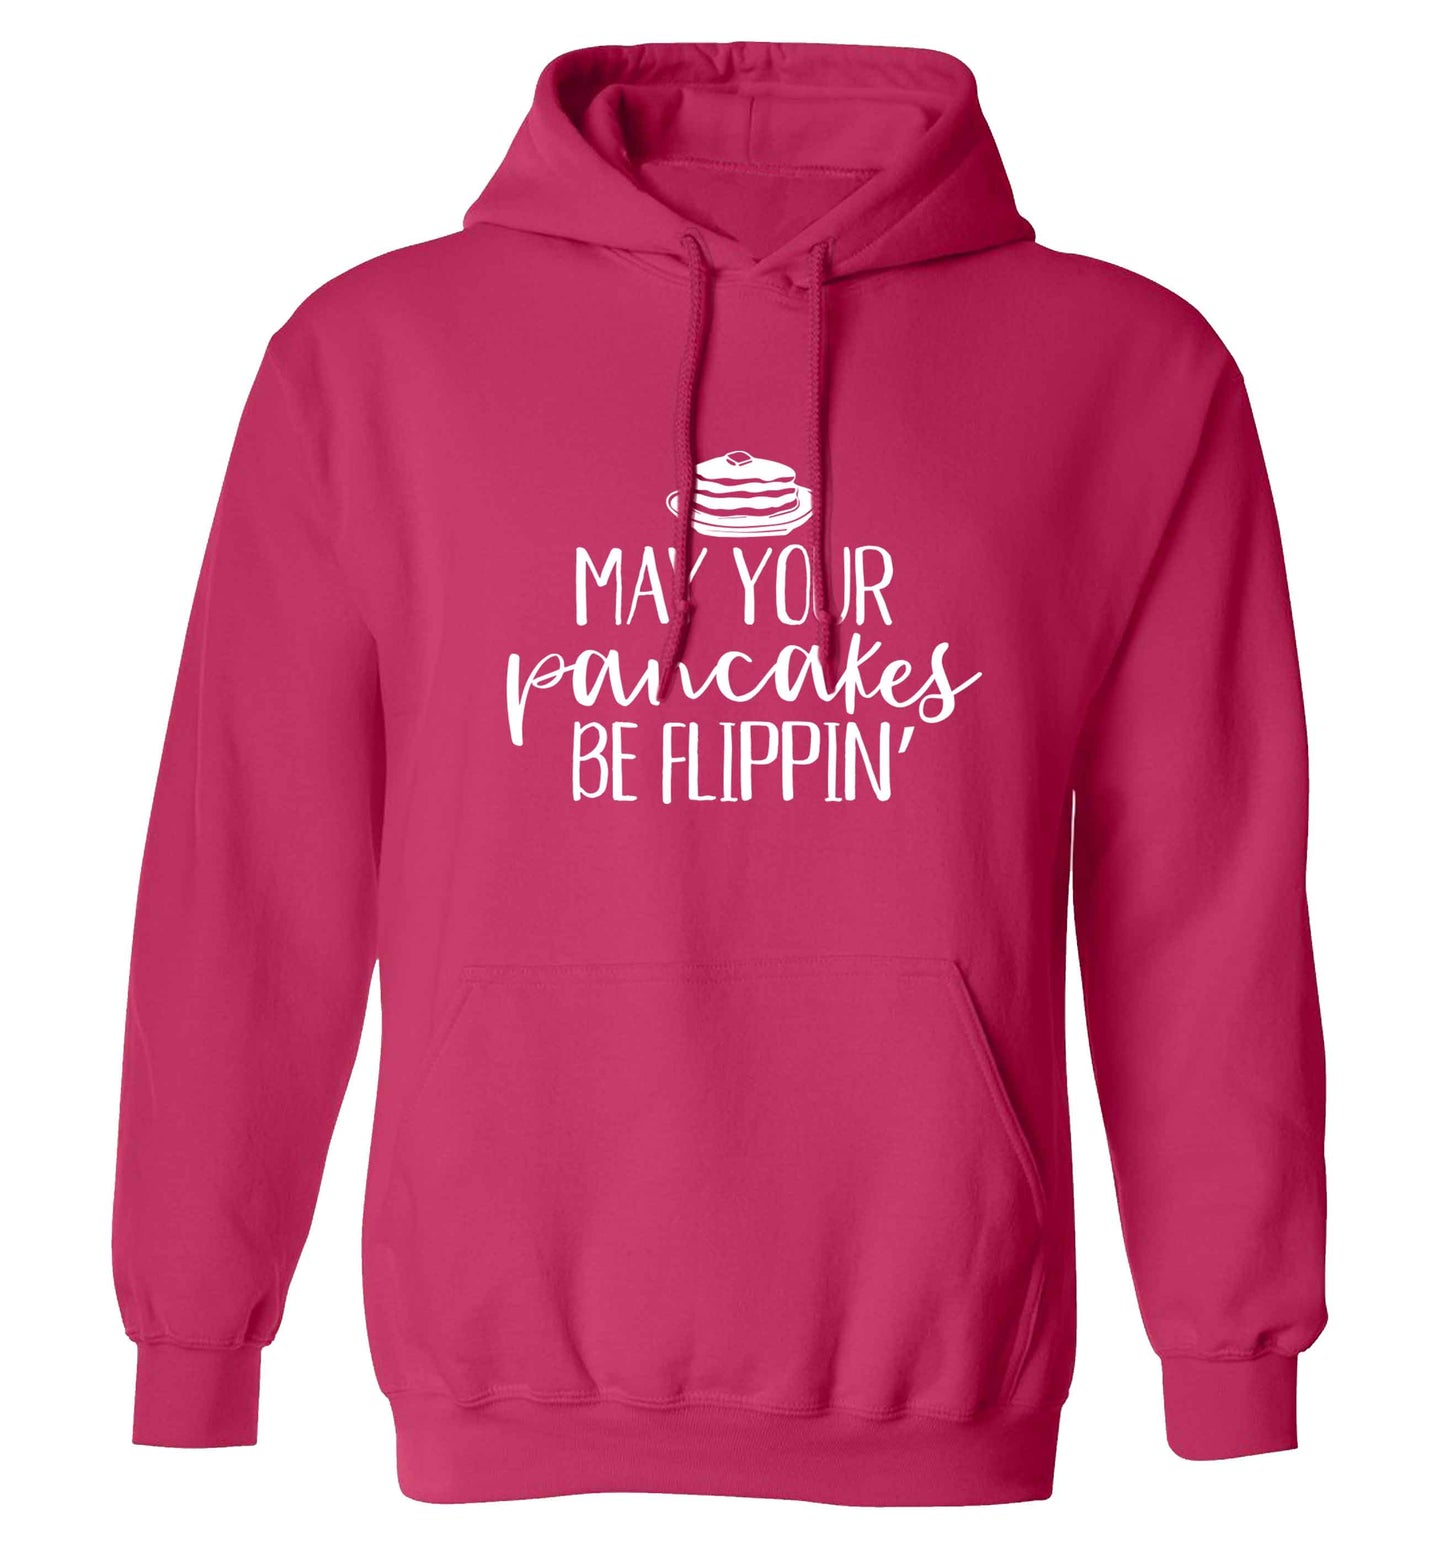 May your pancakes be flippin' adults unisex pink hoodie 2XL